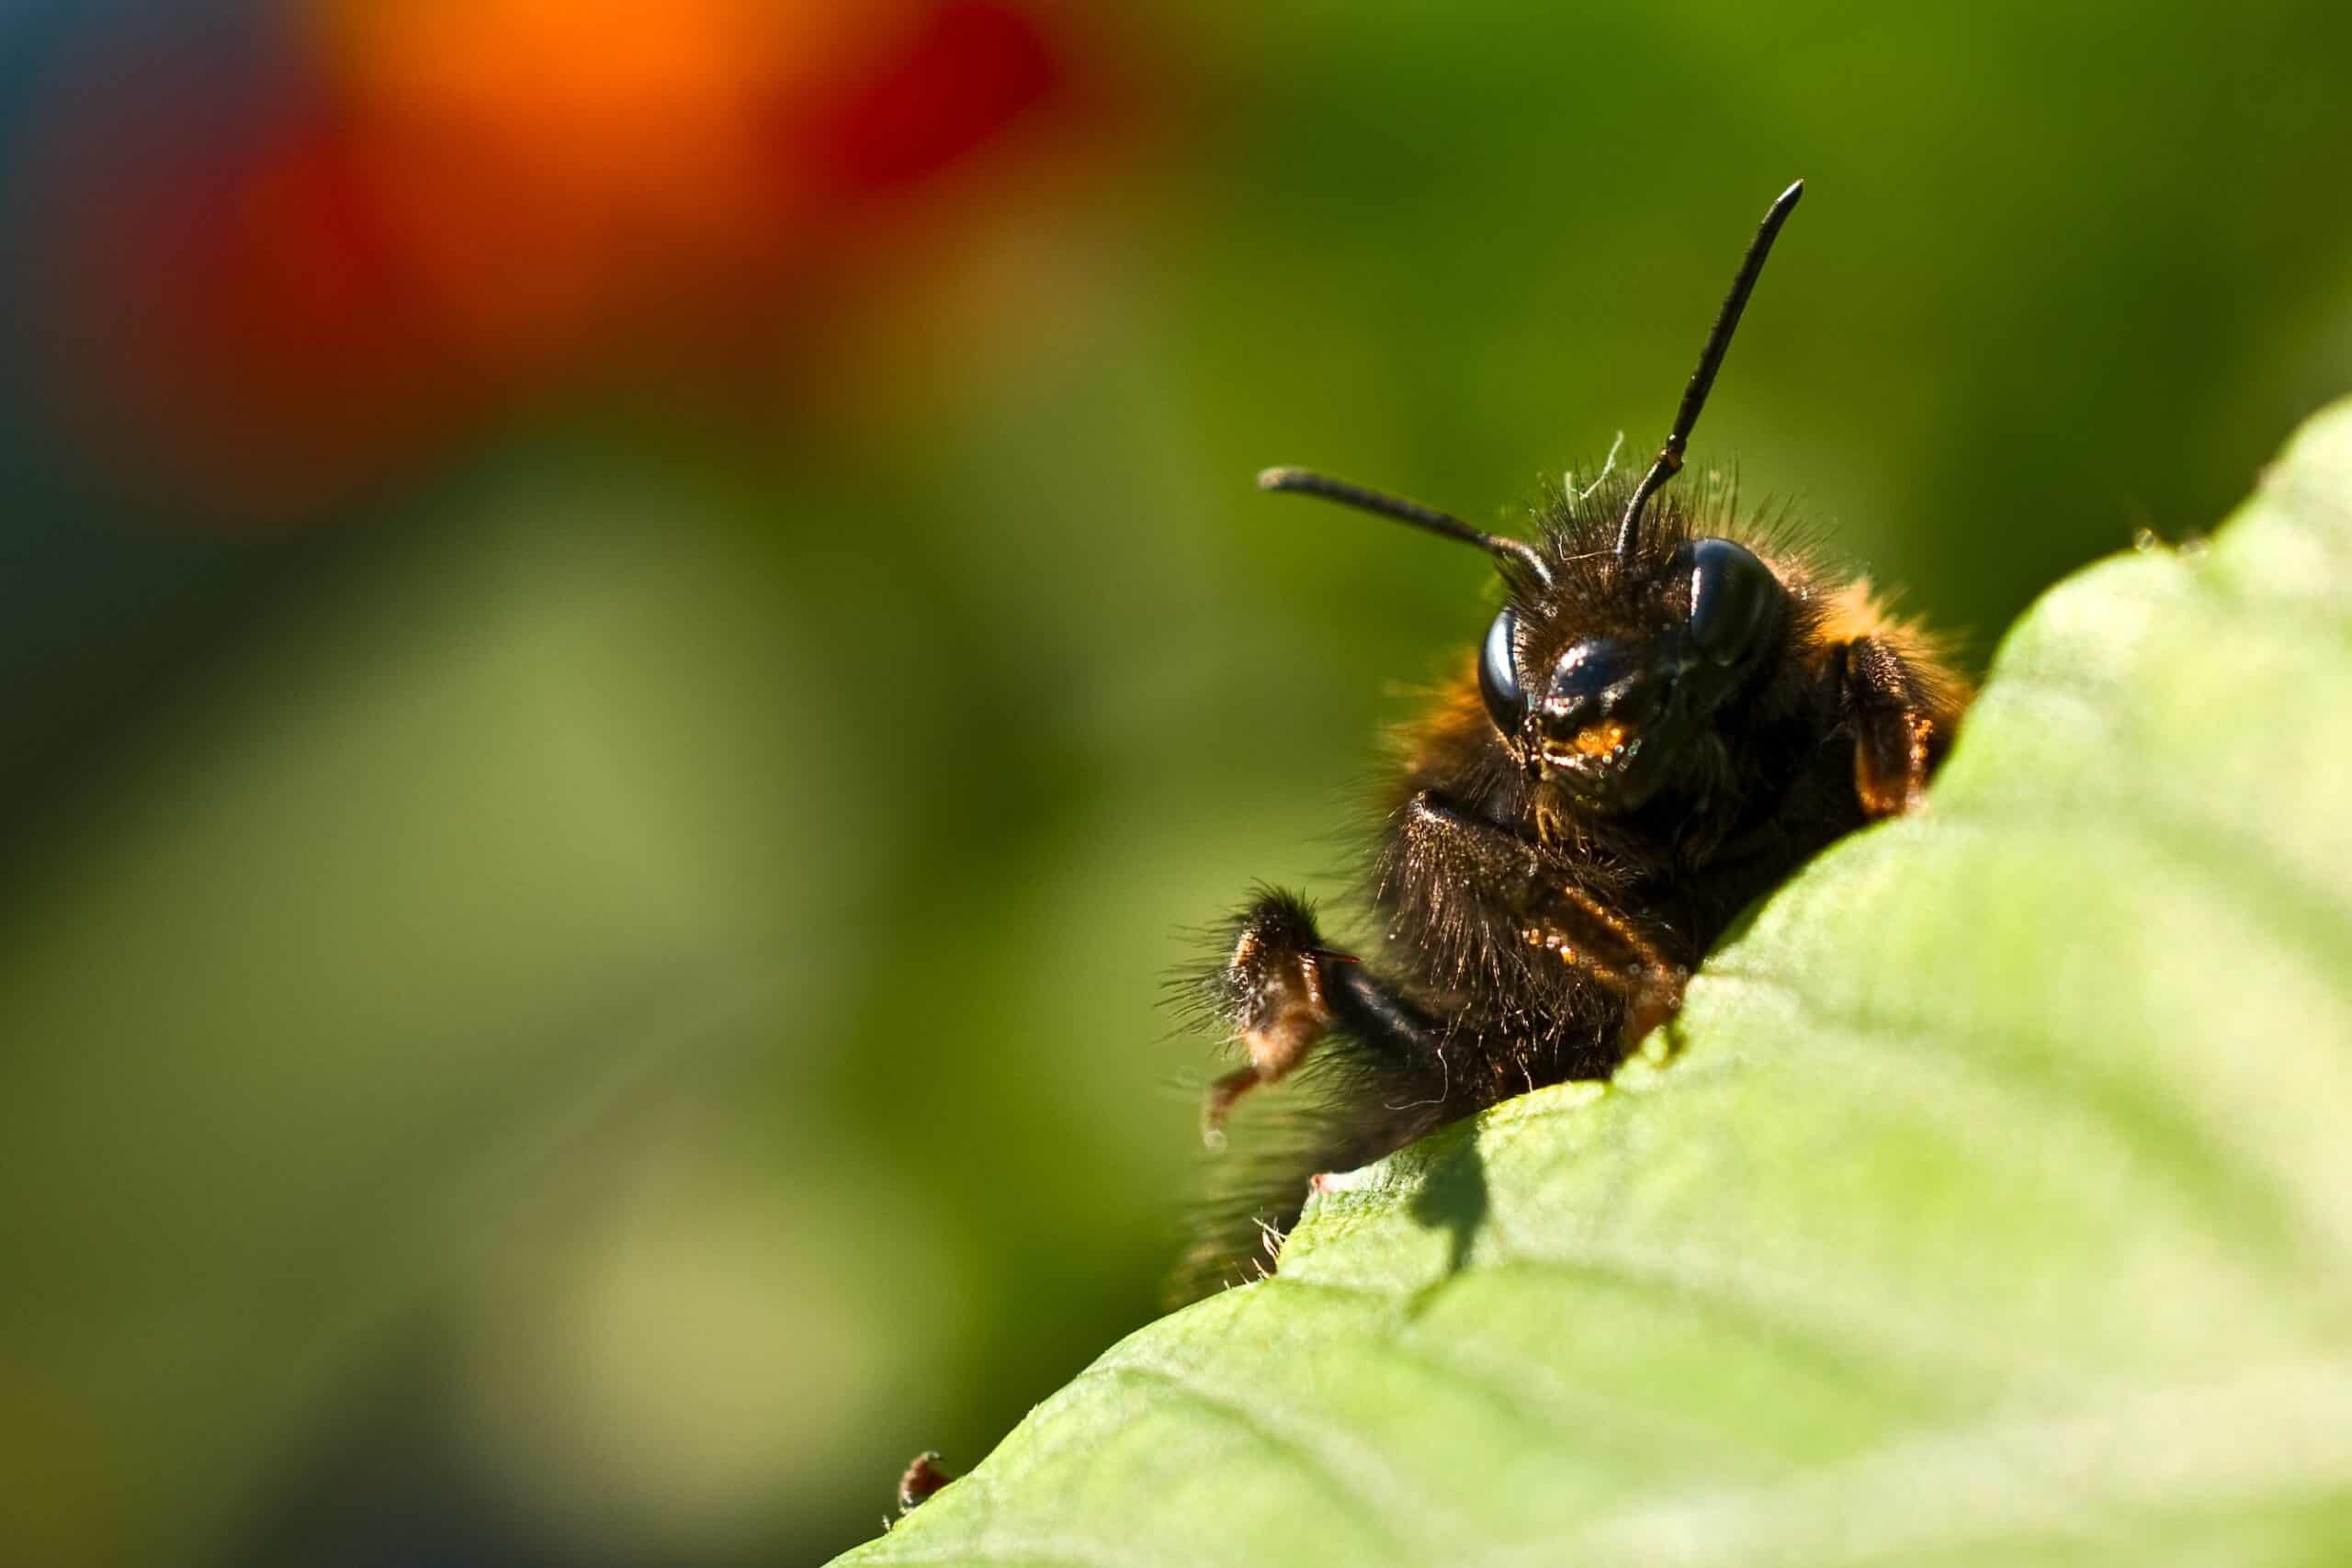 The Symbolic Spiritual Meaning Of A Bumblebee